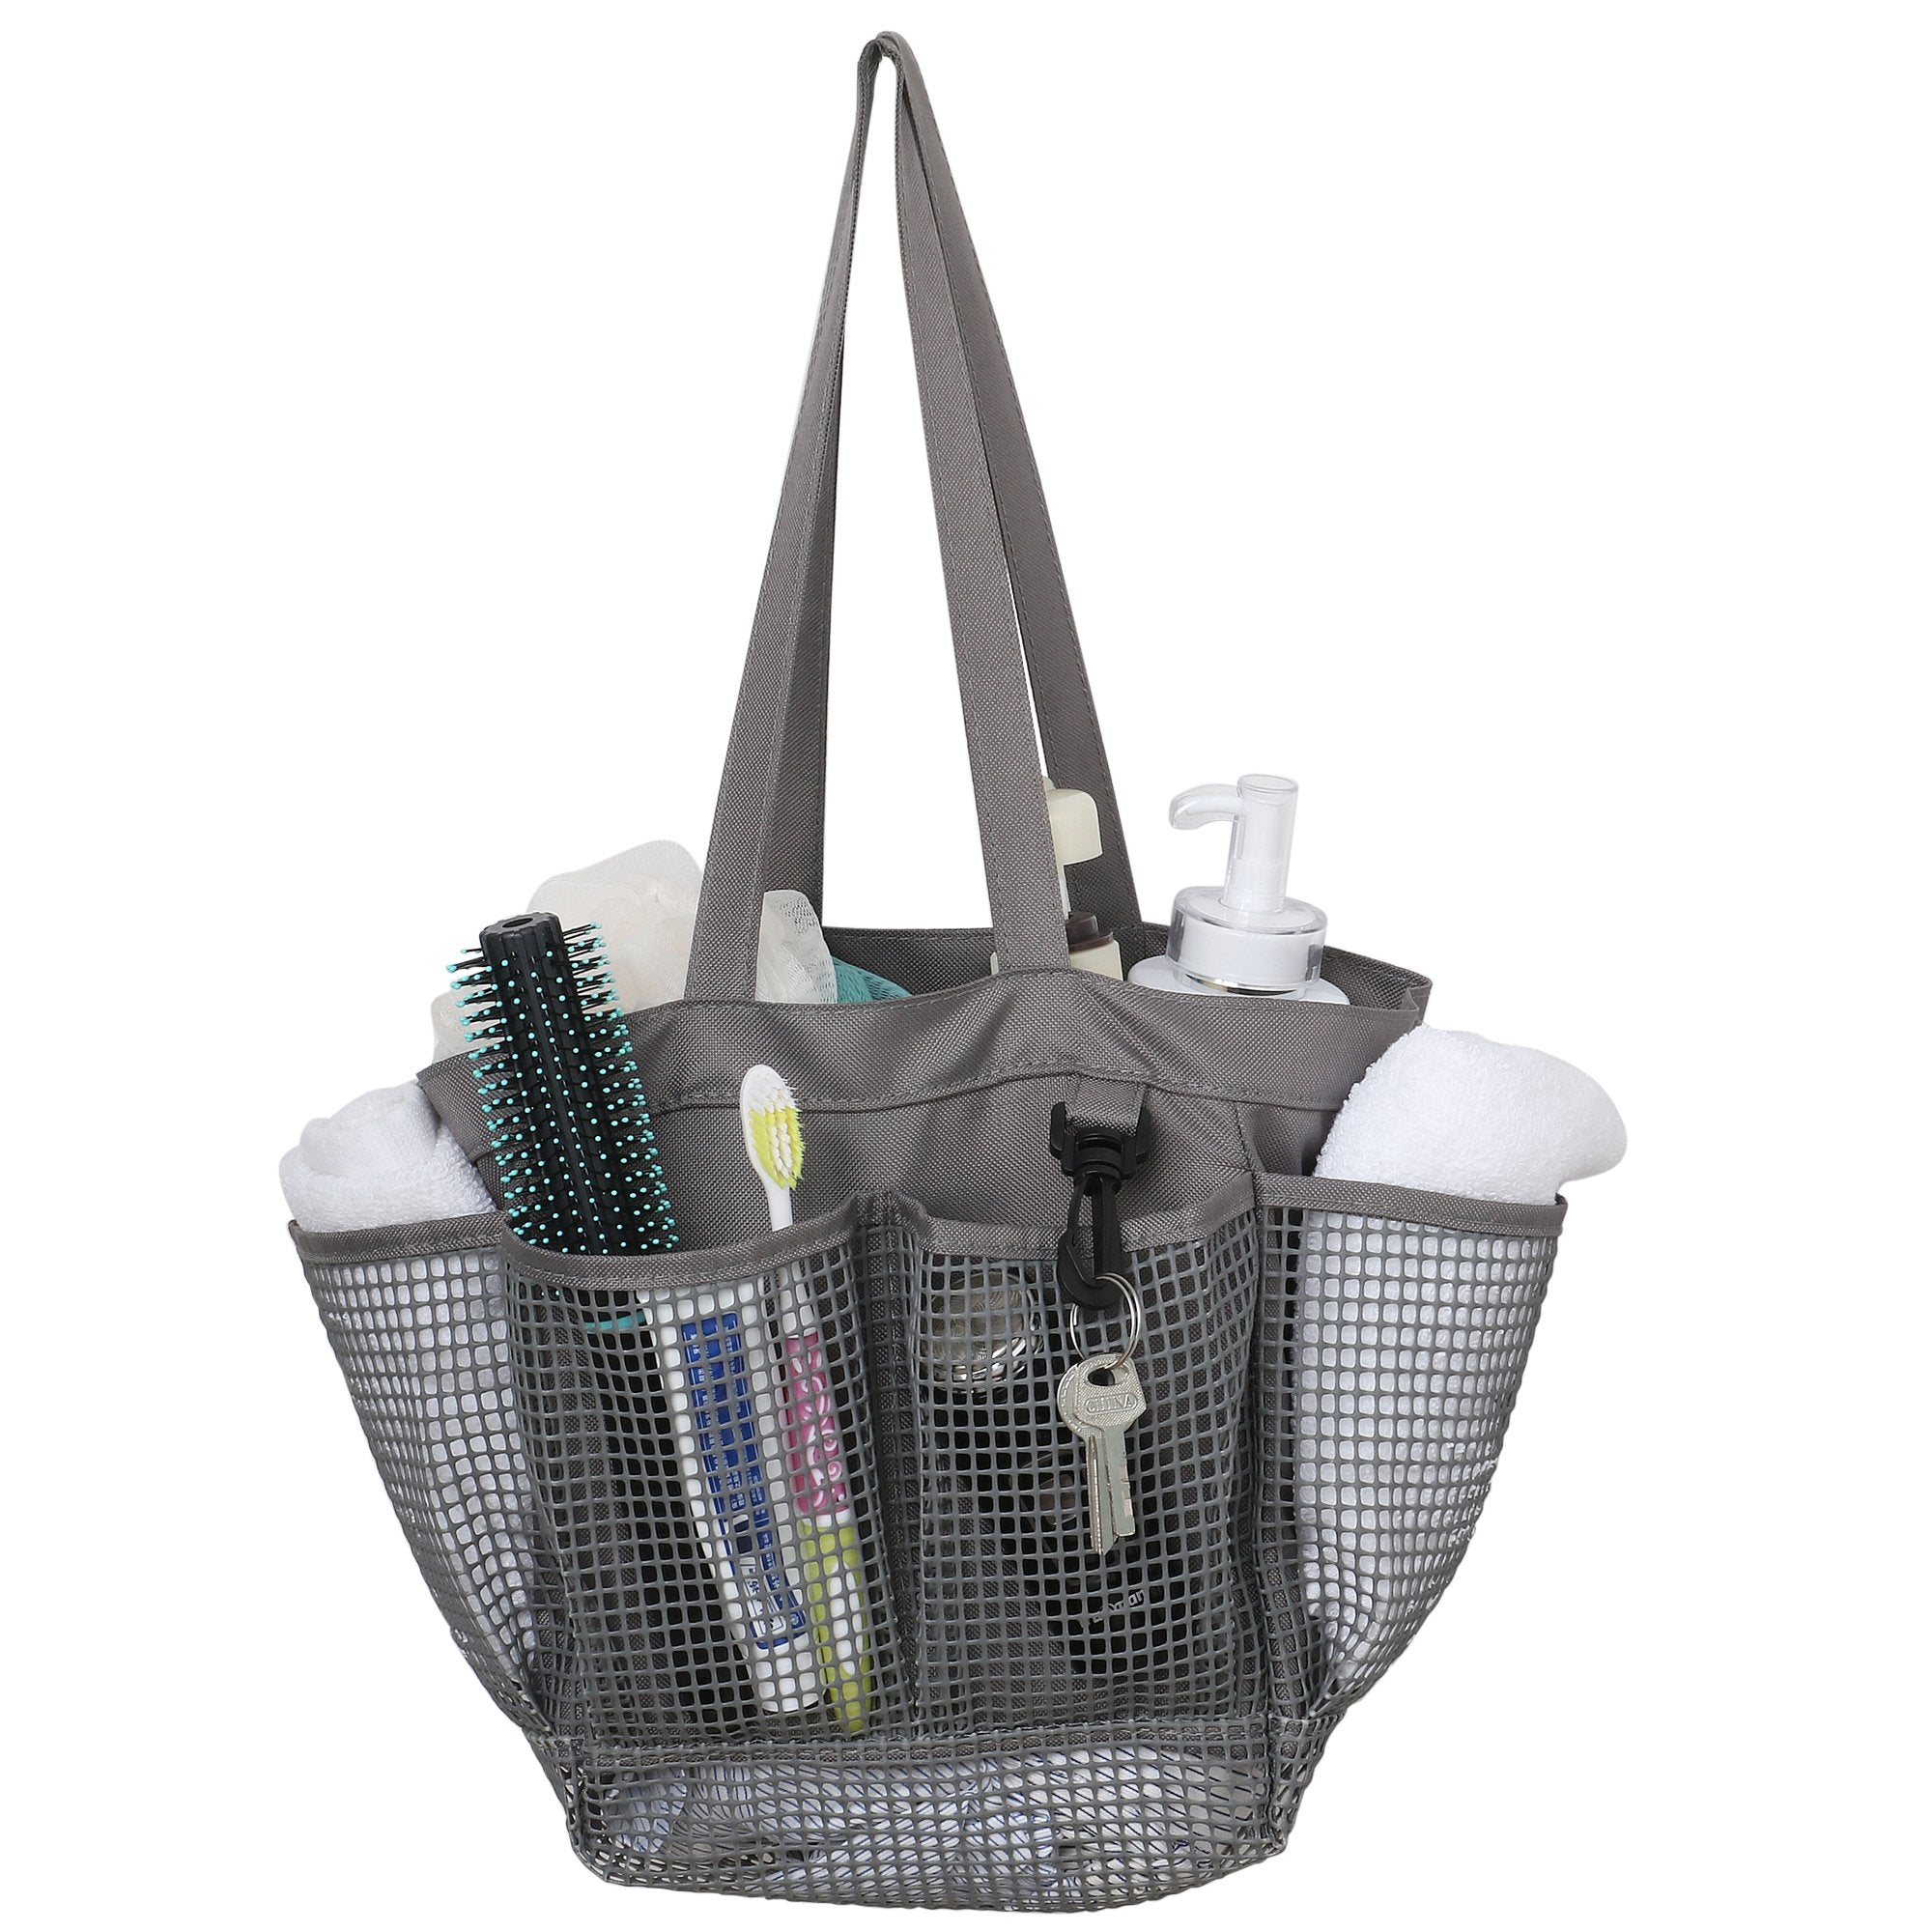 Utopia Alley Mesh Portable Shower Caddy, Quick Dry Shower Tote Bag, Bathroom Organizer Bag, Gray/Blue Color. Perfect For Dorm, Gym, Bath with Handles.